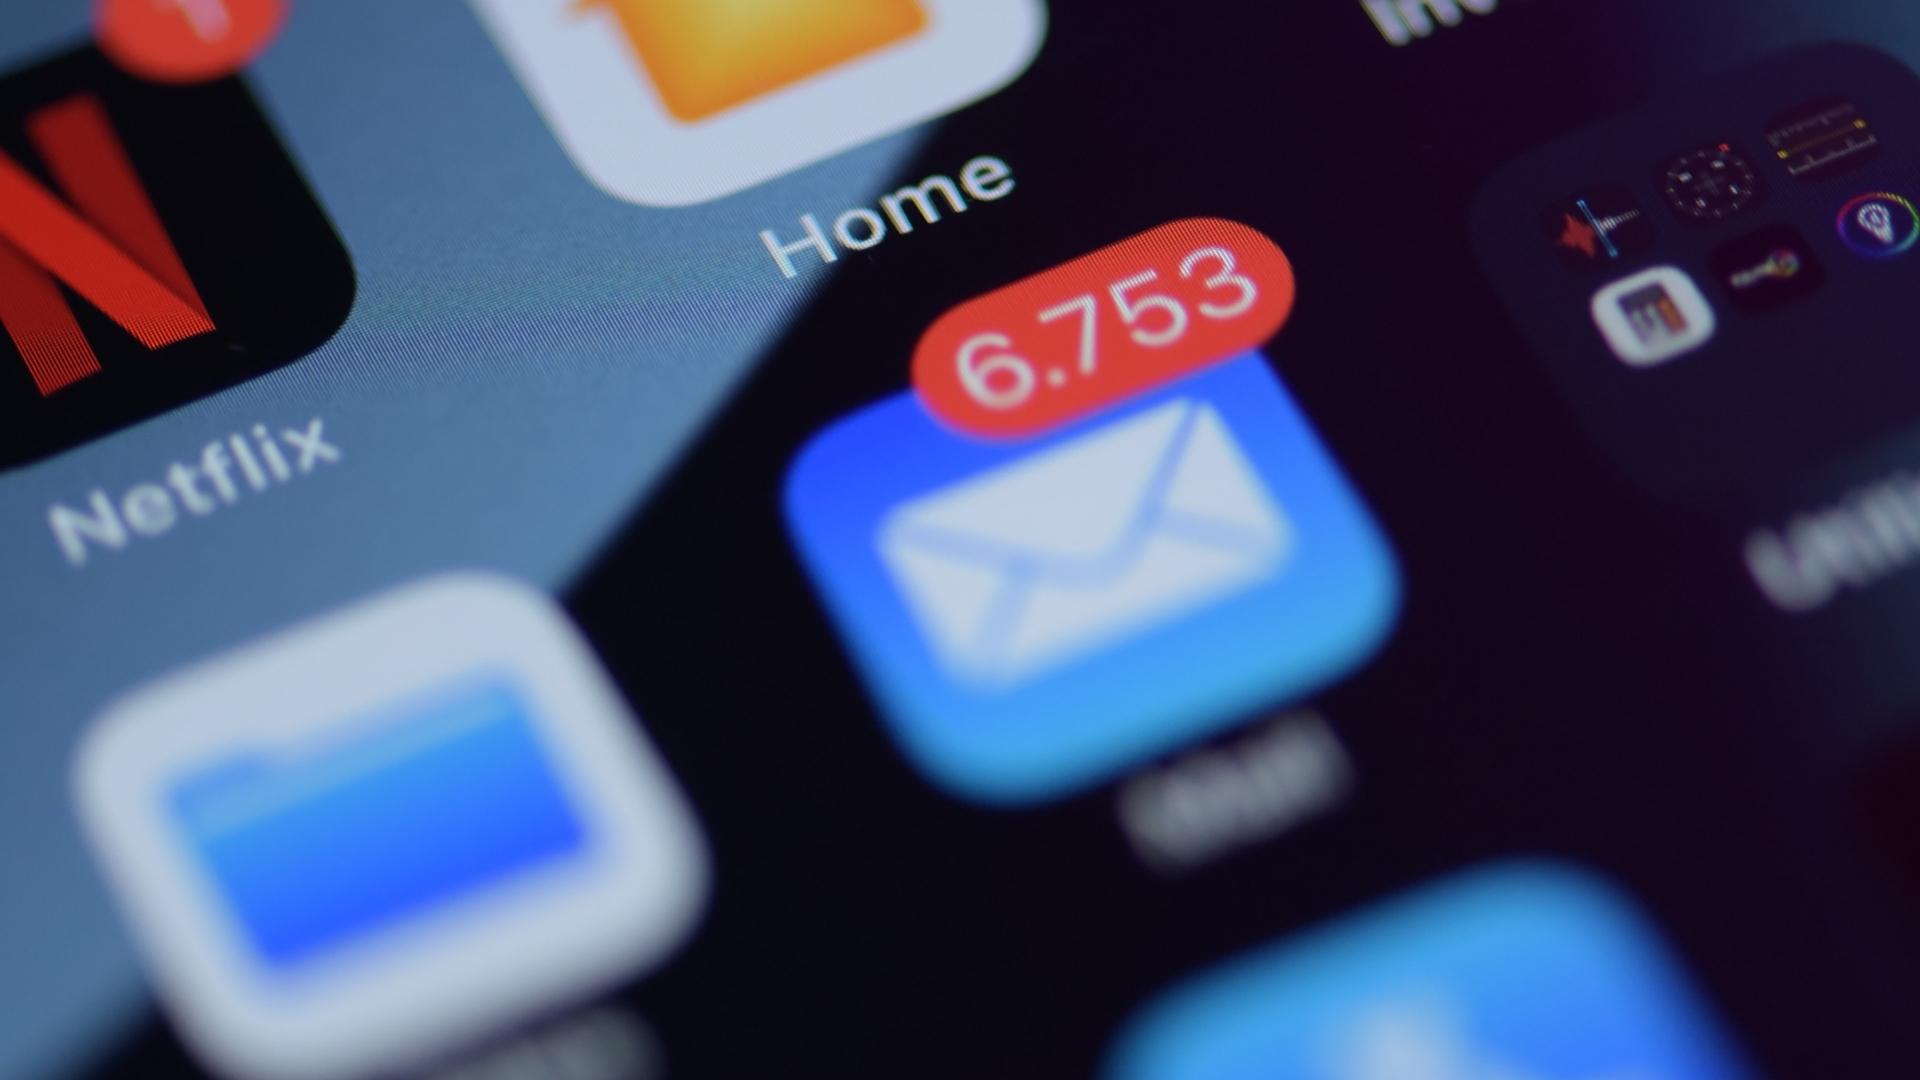 6 Best Fixes for Mail App Notifications Not Working On iPhone